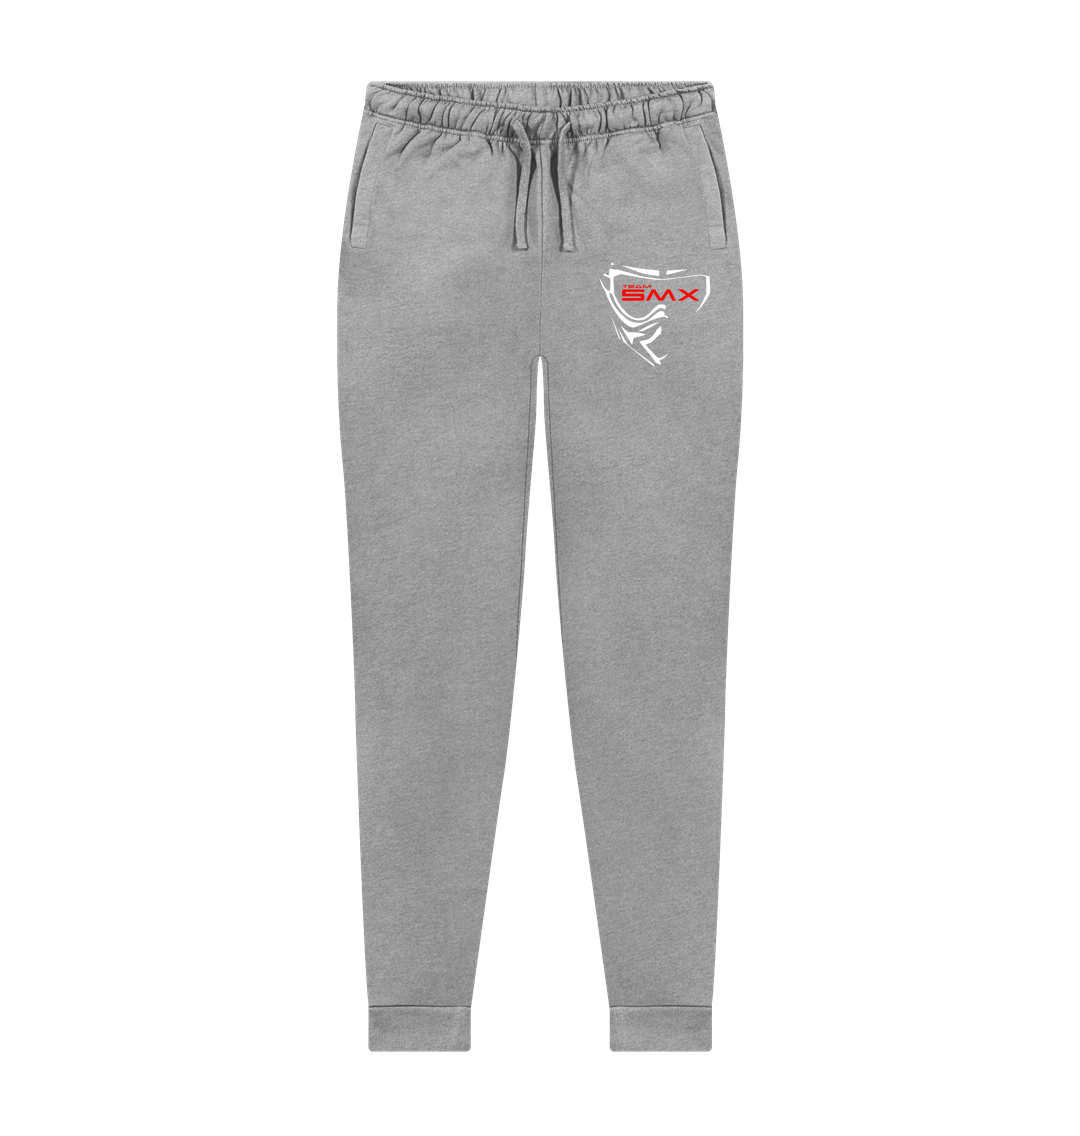 Athletic Grey SMX Team Joggers (Womens)